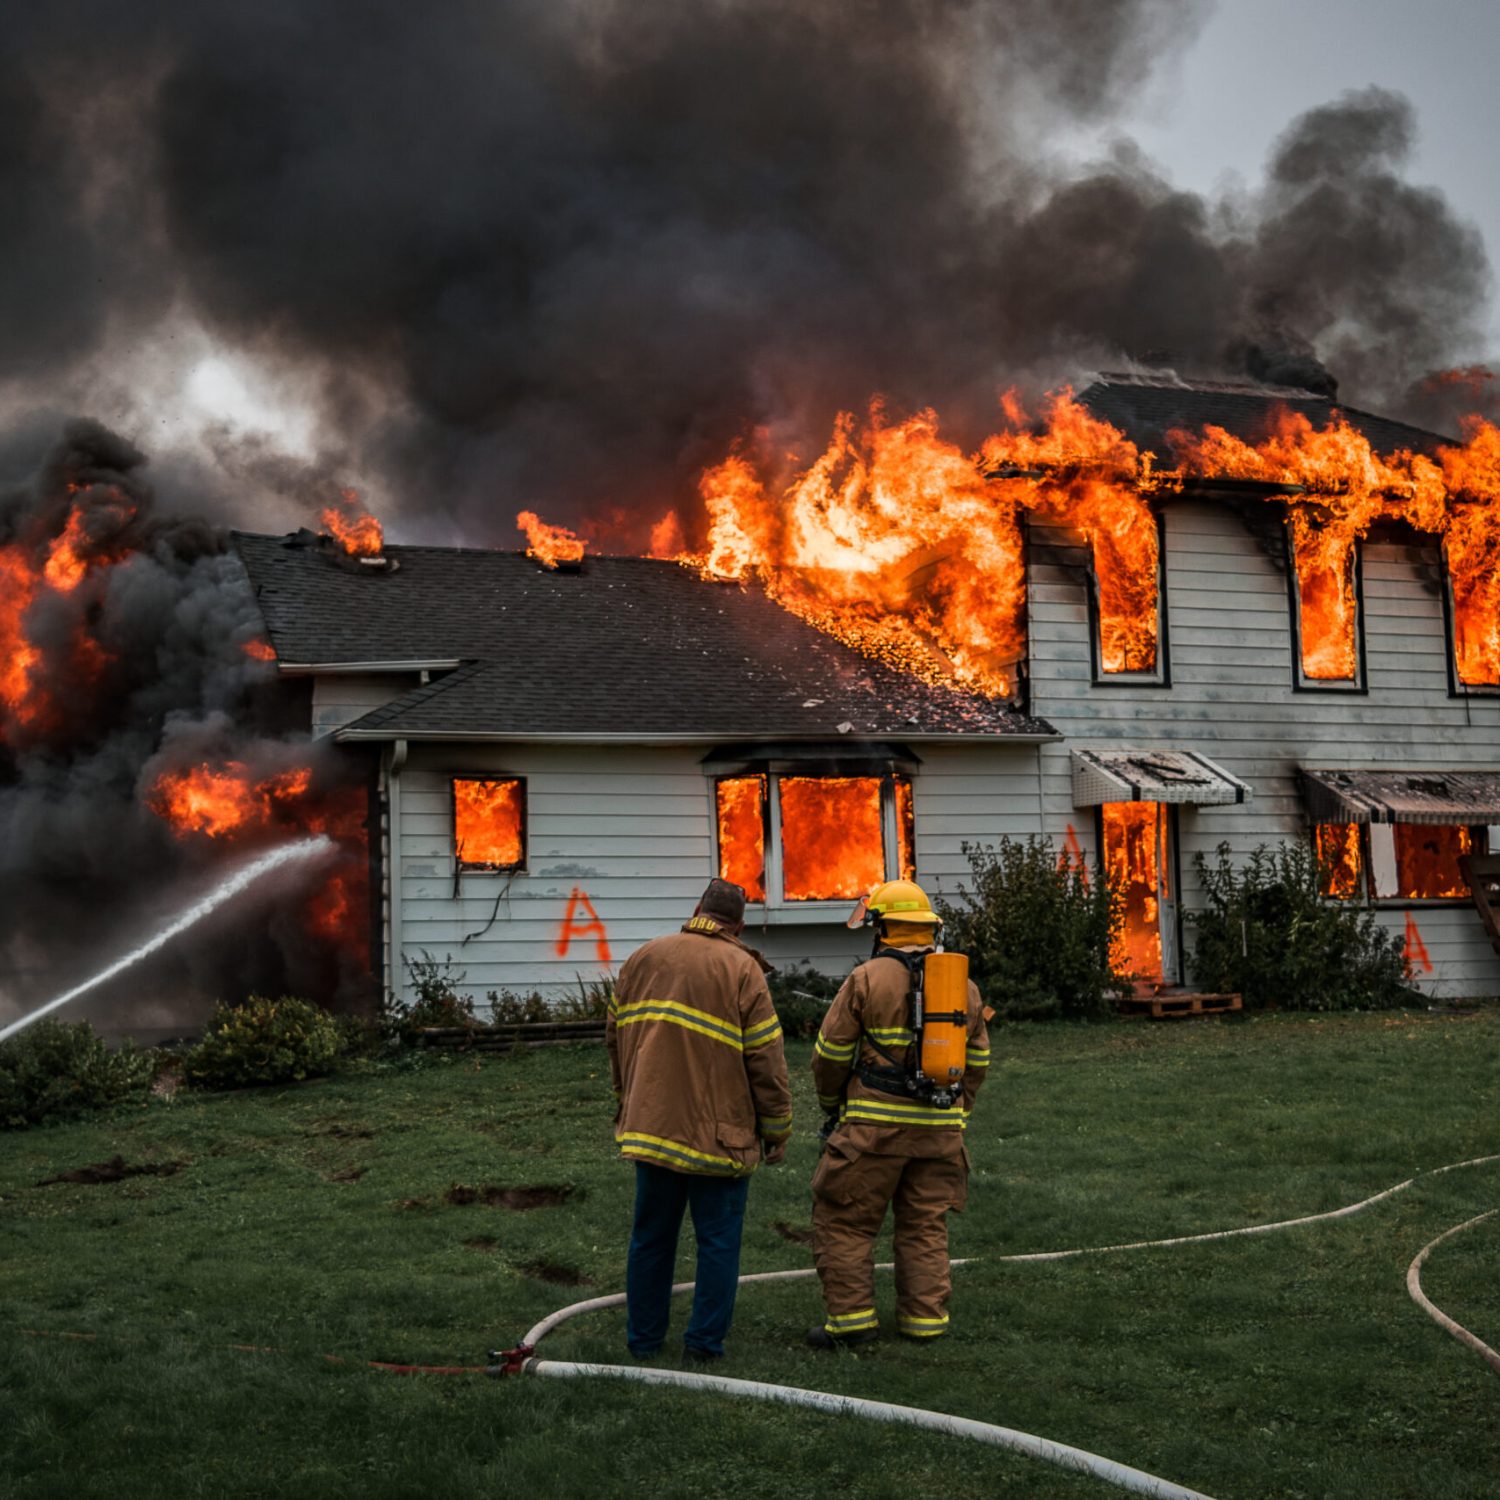 Fire Fighters Putting Out A House Fire